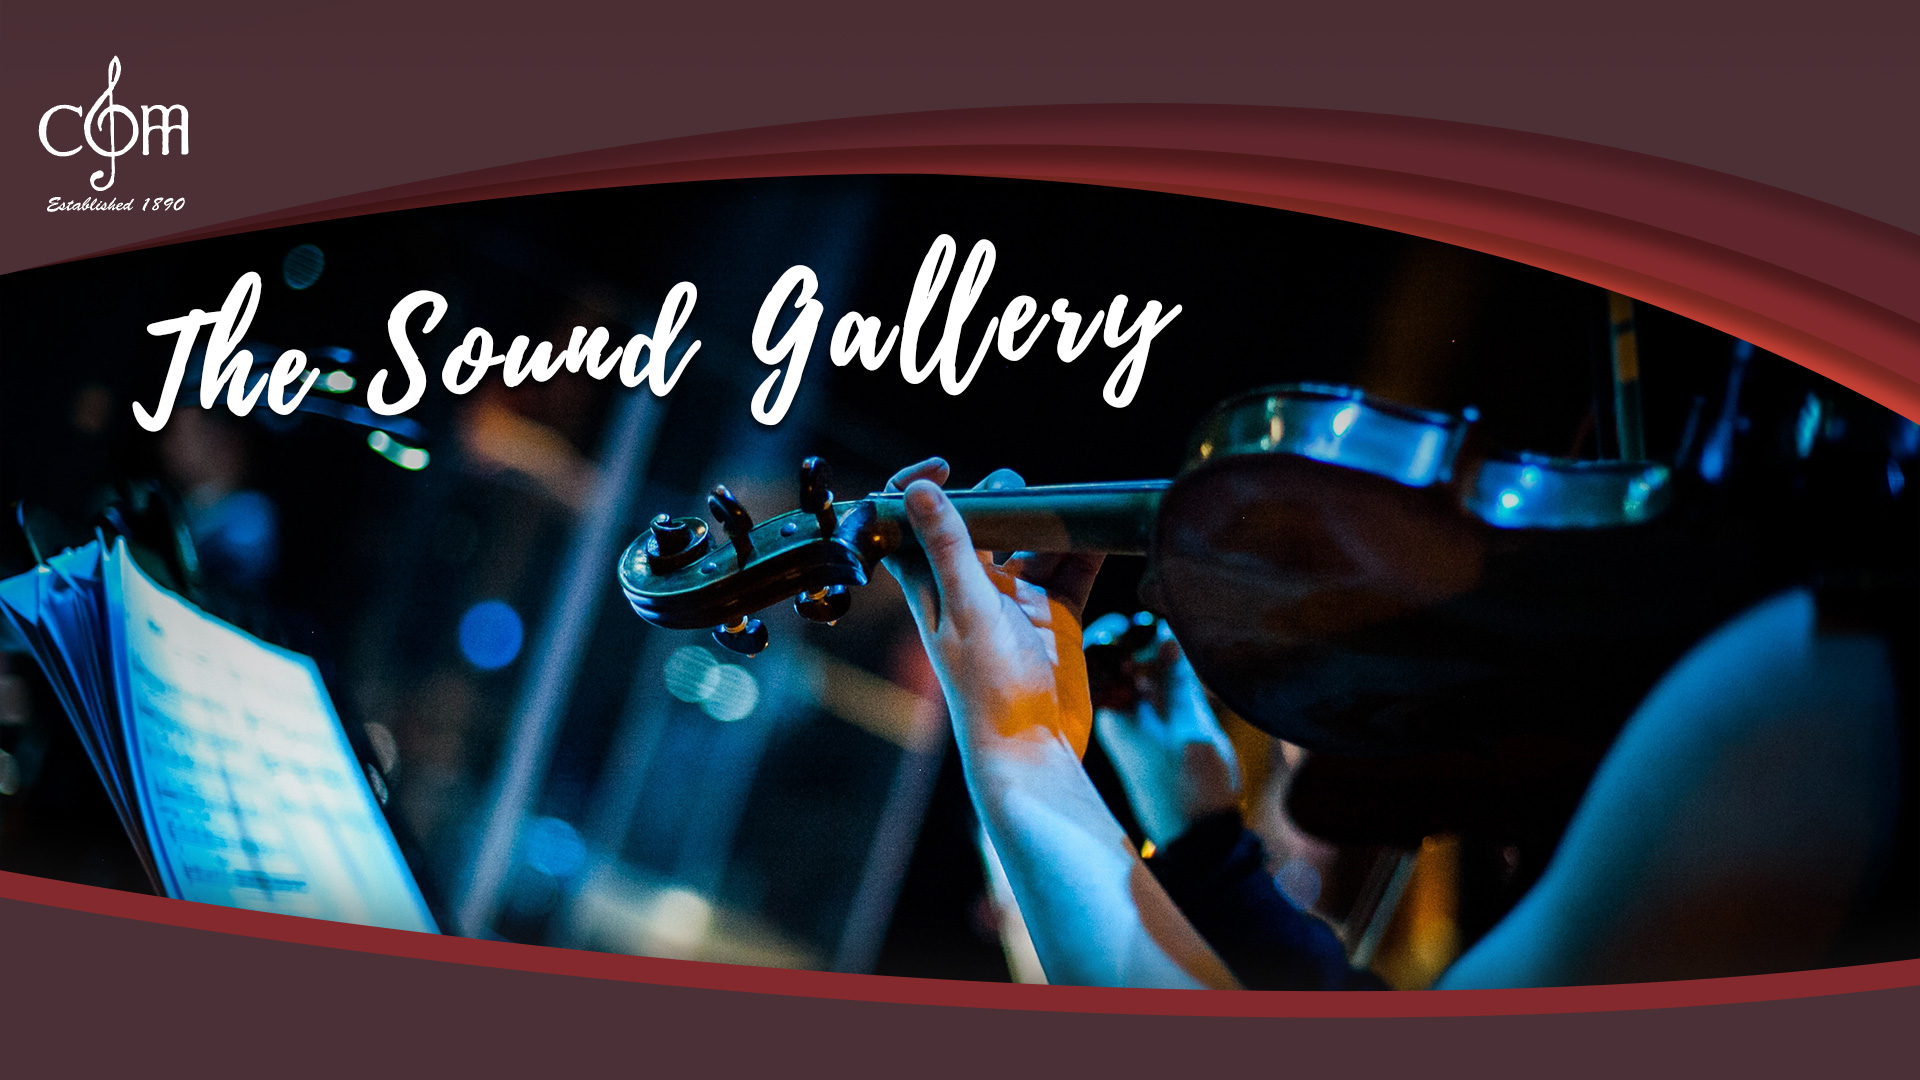 In Recital Live! The Sound Gallery